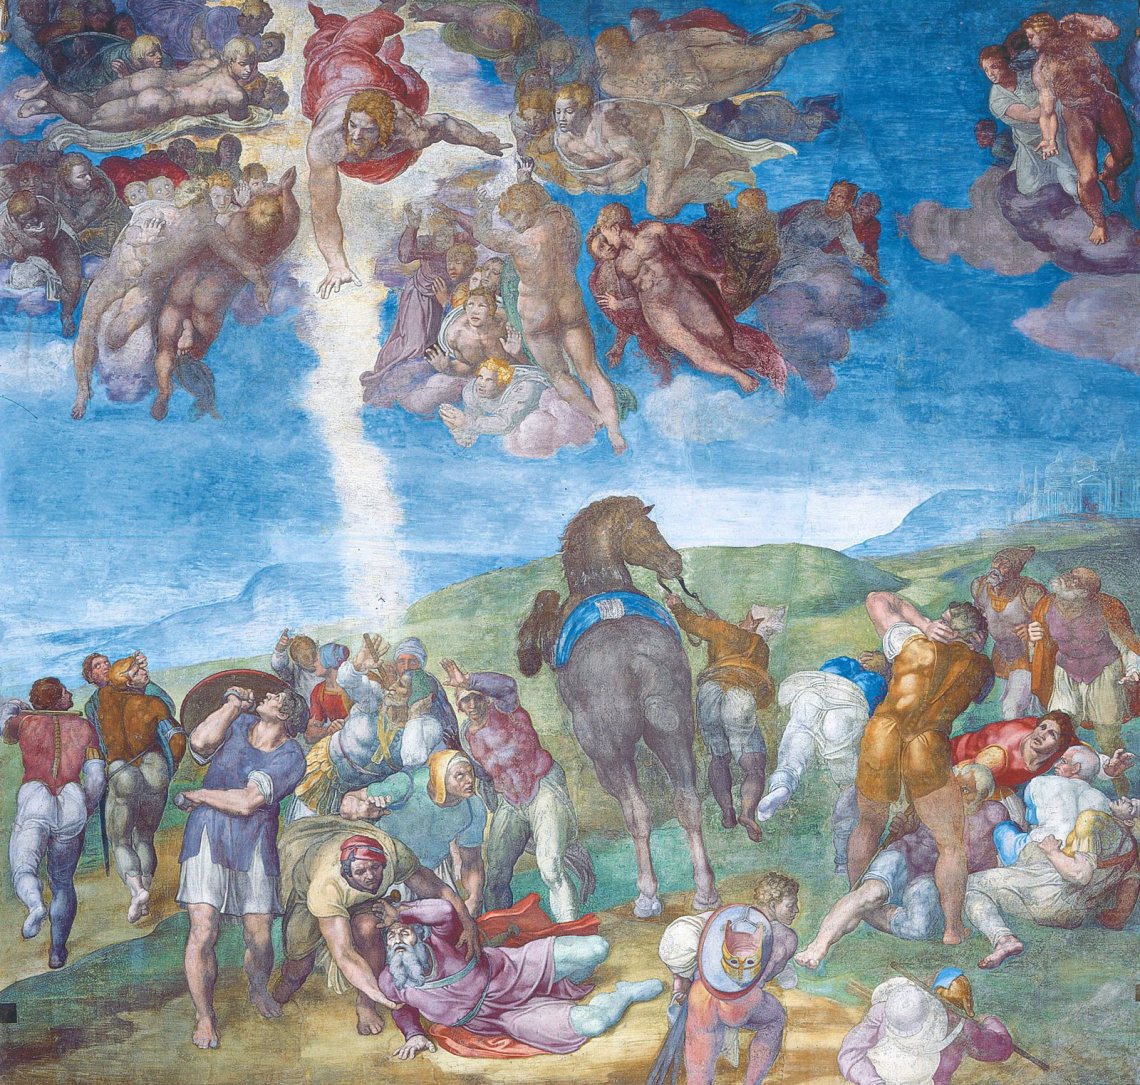 The Conversion of Paul by Michelangelo